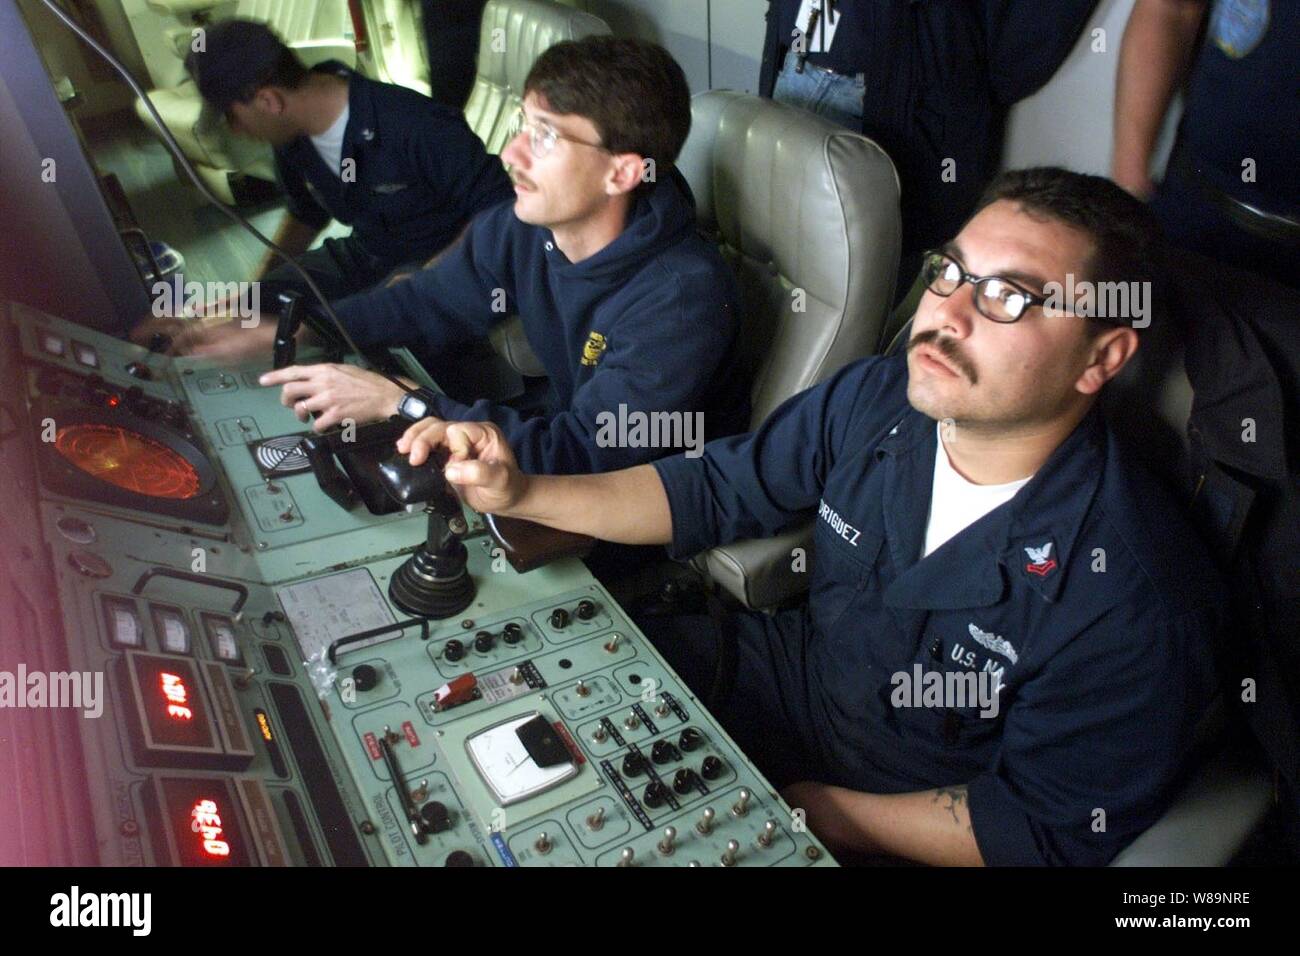 Petty Officers 2nd Class Robert Rodriguez (right) and Robert Duncan (left) watch the video monitors as they search the ocean floor for the flight data recorder from the downed Alaska Airlines Flight 261 off the coast of Ventura County, Calif., on Feb. 3, 2000.  Rodriguez is piloting the SCORPIO, a  tethered unmanned work vehicle from the Navy's Deep Submergence Unit Unmanned Vehicle Detachment.  Duncan is the co-pilot and is responsible for the robotic hands of the SCORPIO.  The two Navy machinistХs mates are controlling the submersible from the MV Kellie Chouest, a Military Sealift Command Su Stock Photo